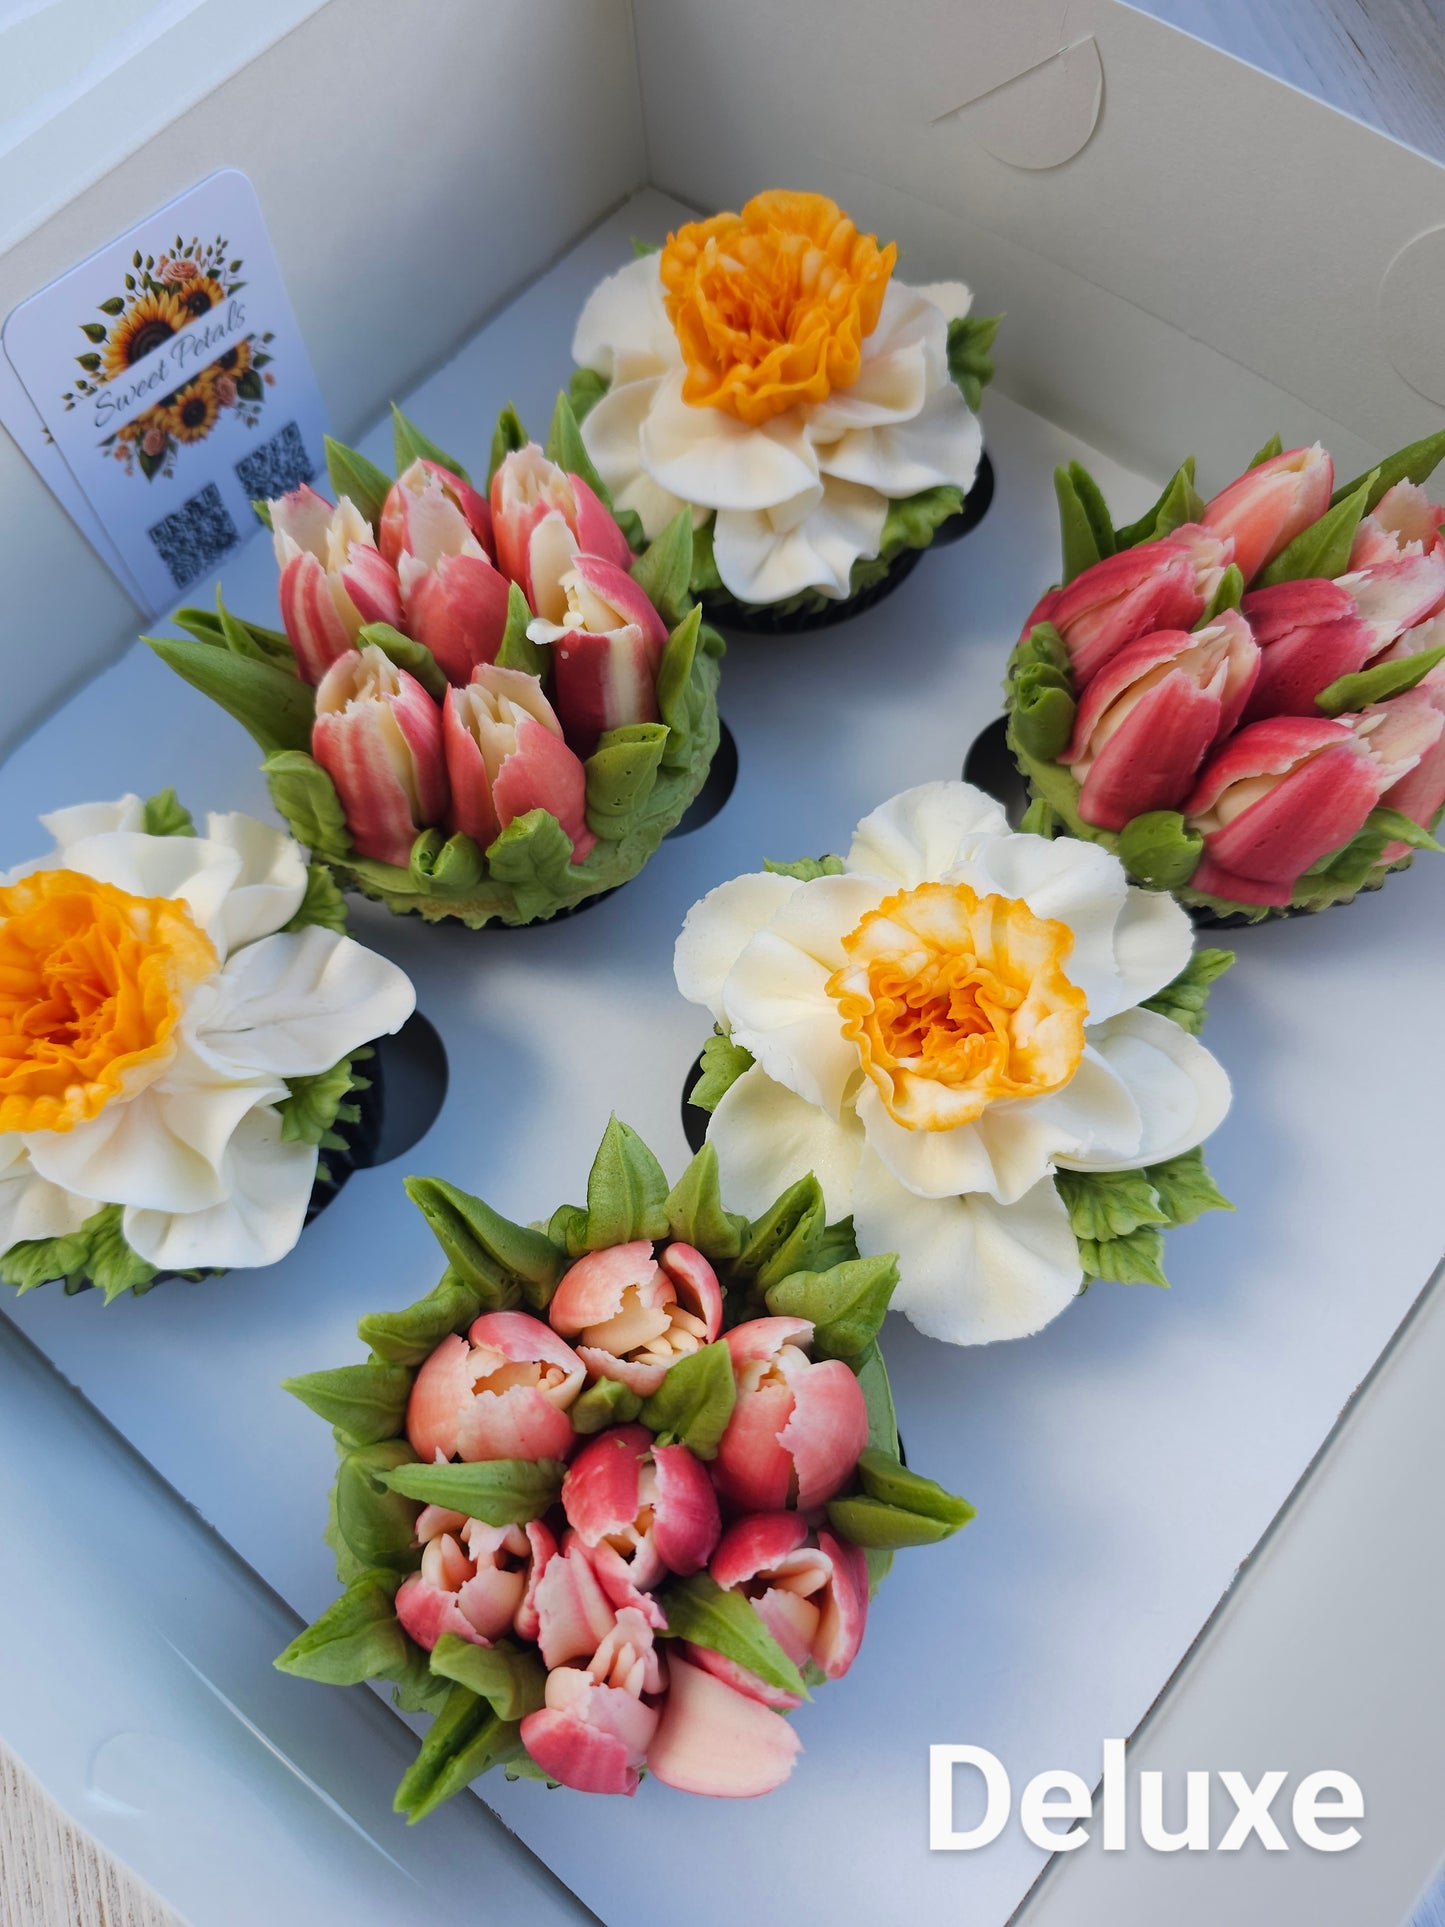 Deluxe: Boxed and Beautiful - Spring Tulips and Daffodils